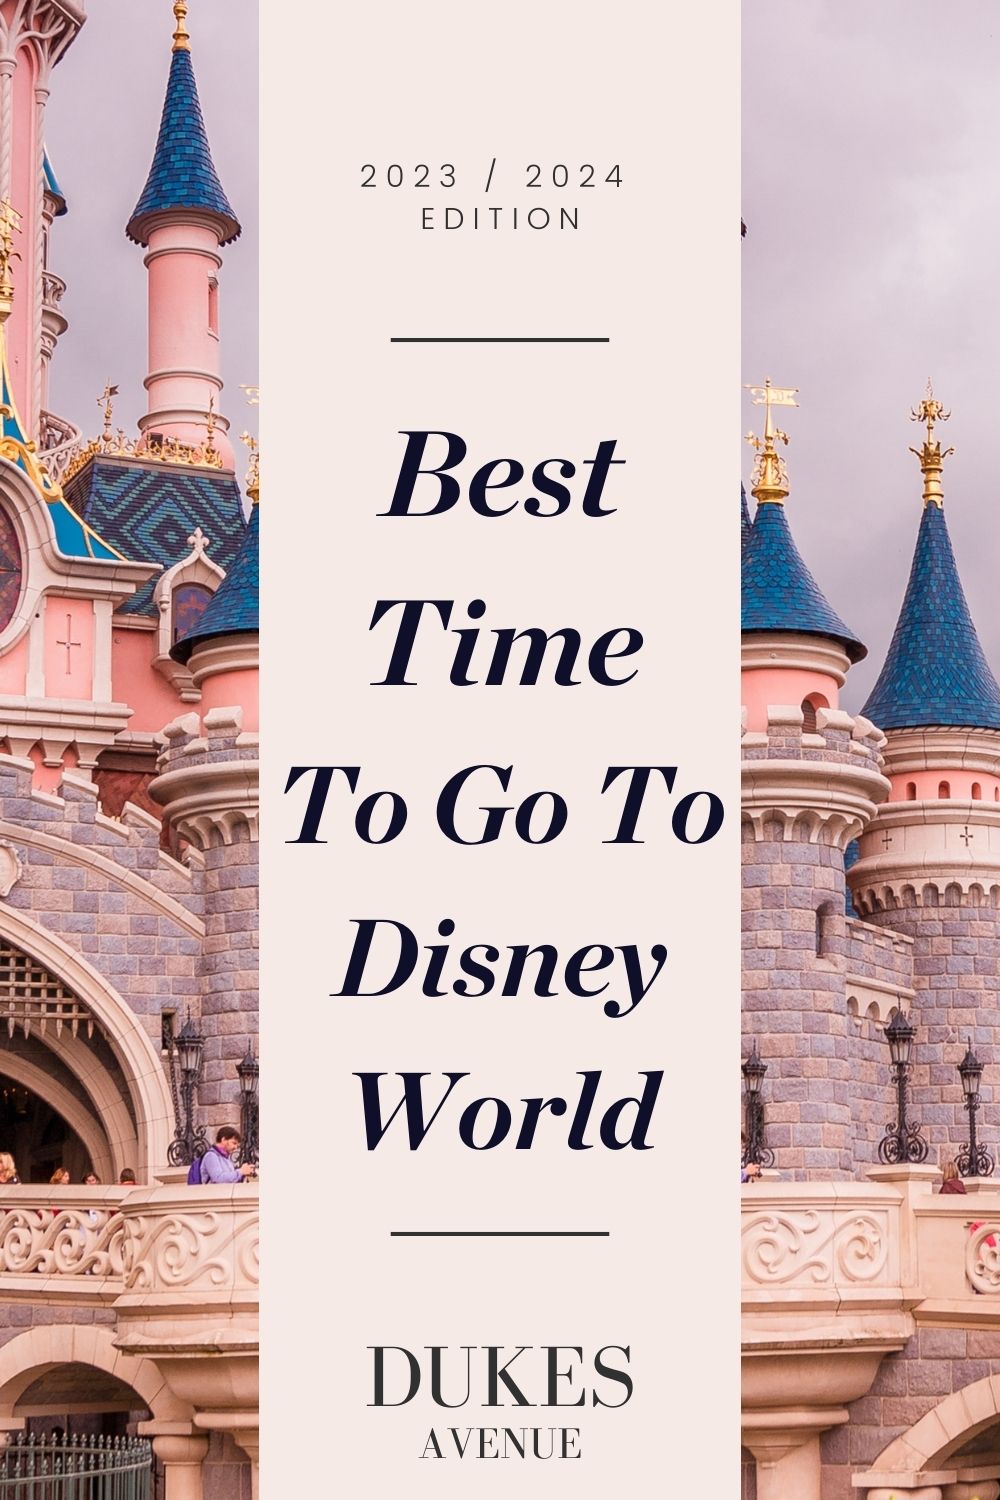 Image of the Disney World castle with text overlay 'Best Time to Go To Disney World' 